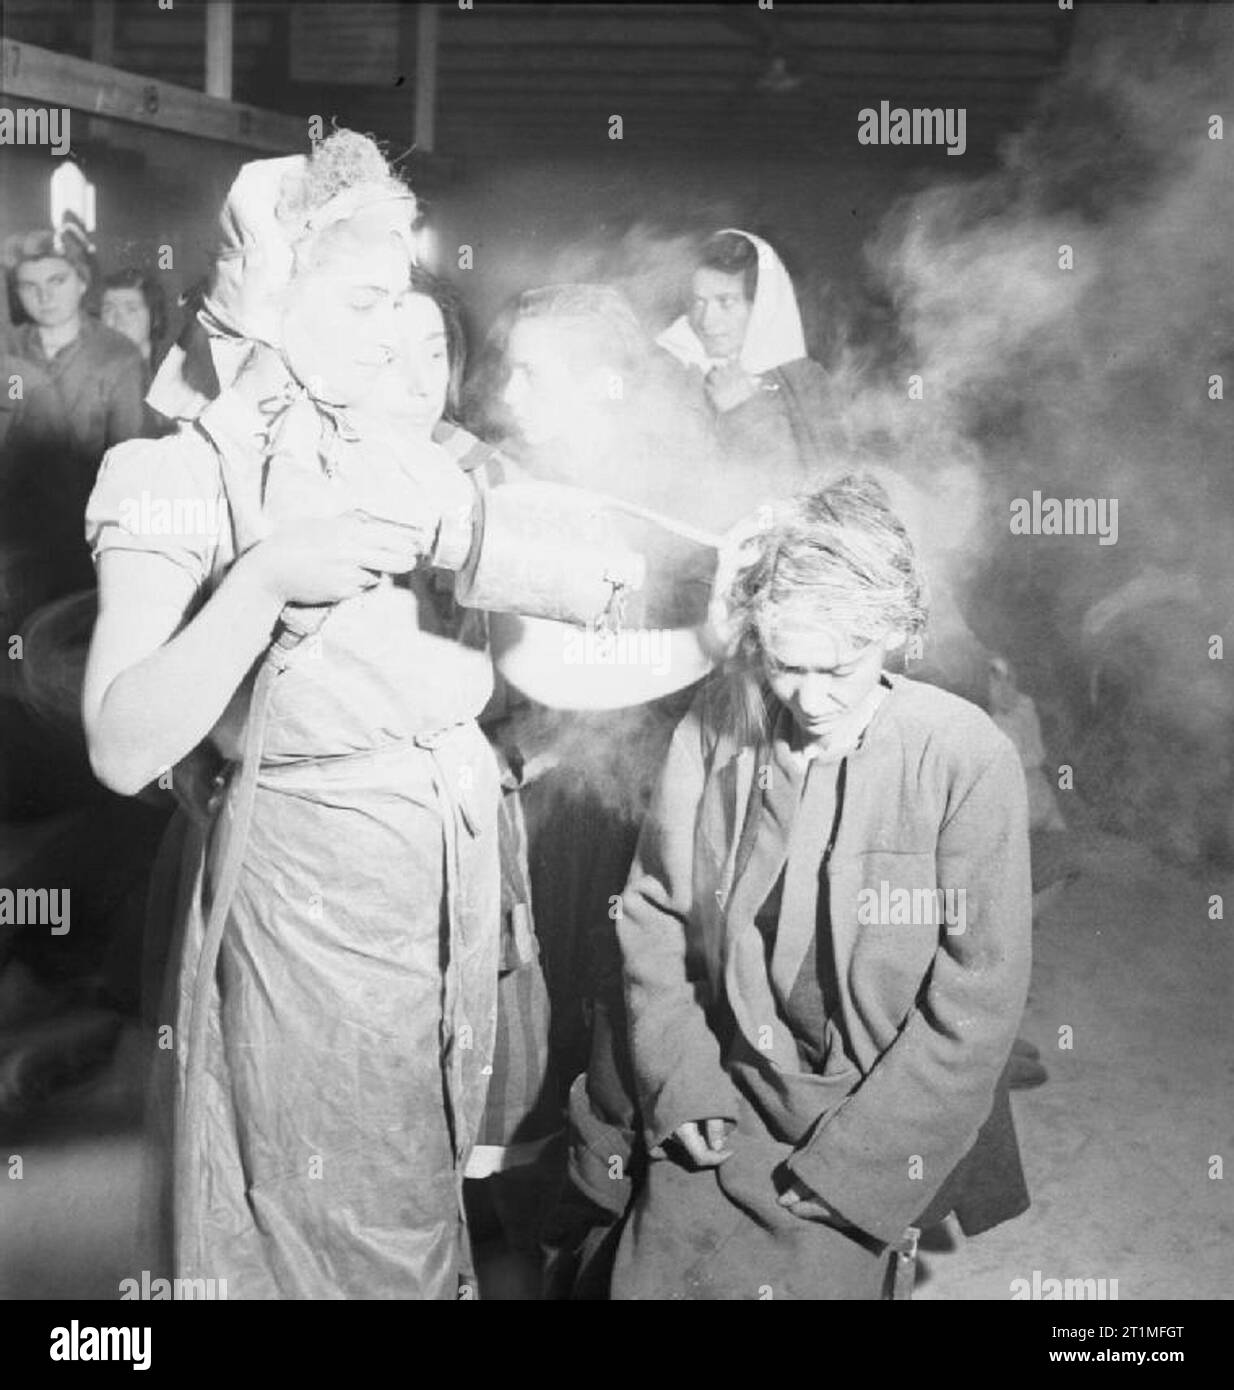 The Liberation of Bergen-belsen Concentration Camp, May 1945 After dressing in clean clothes, a woman inmate is dusted with DDT powder to kill the lice which spread typhus. The dusting is done by other former camp inmates (many of whom were trained nurses before being interned) under the supervision of the Royal Army Medical Corps. Stock Photo